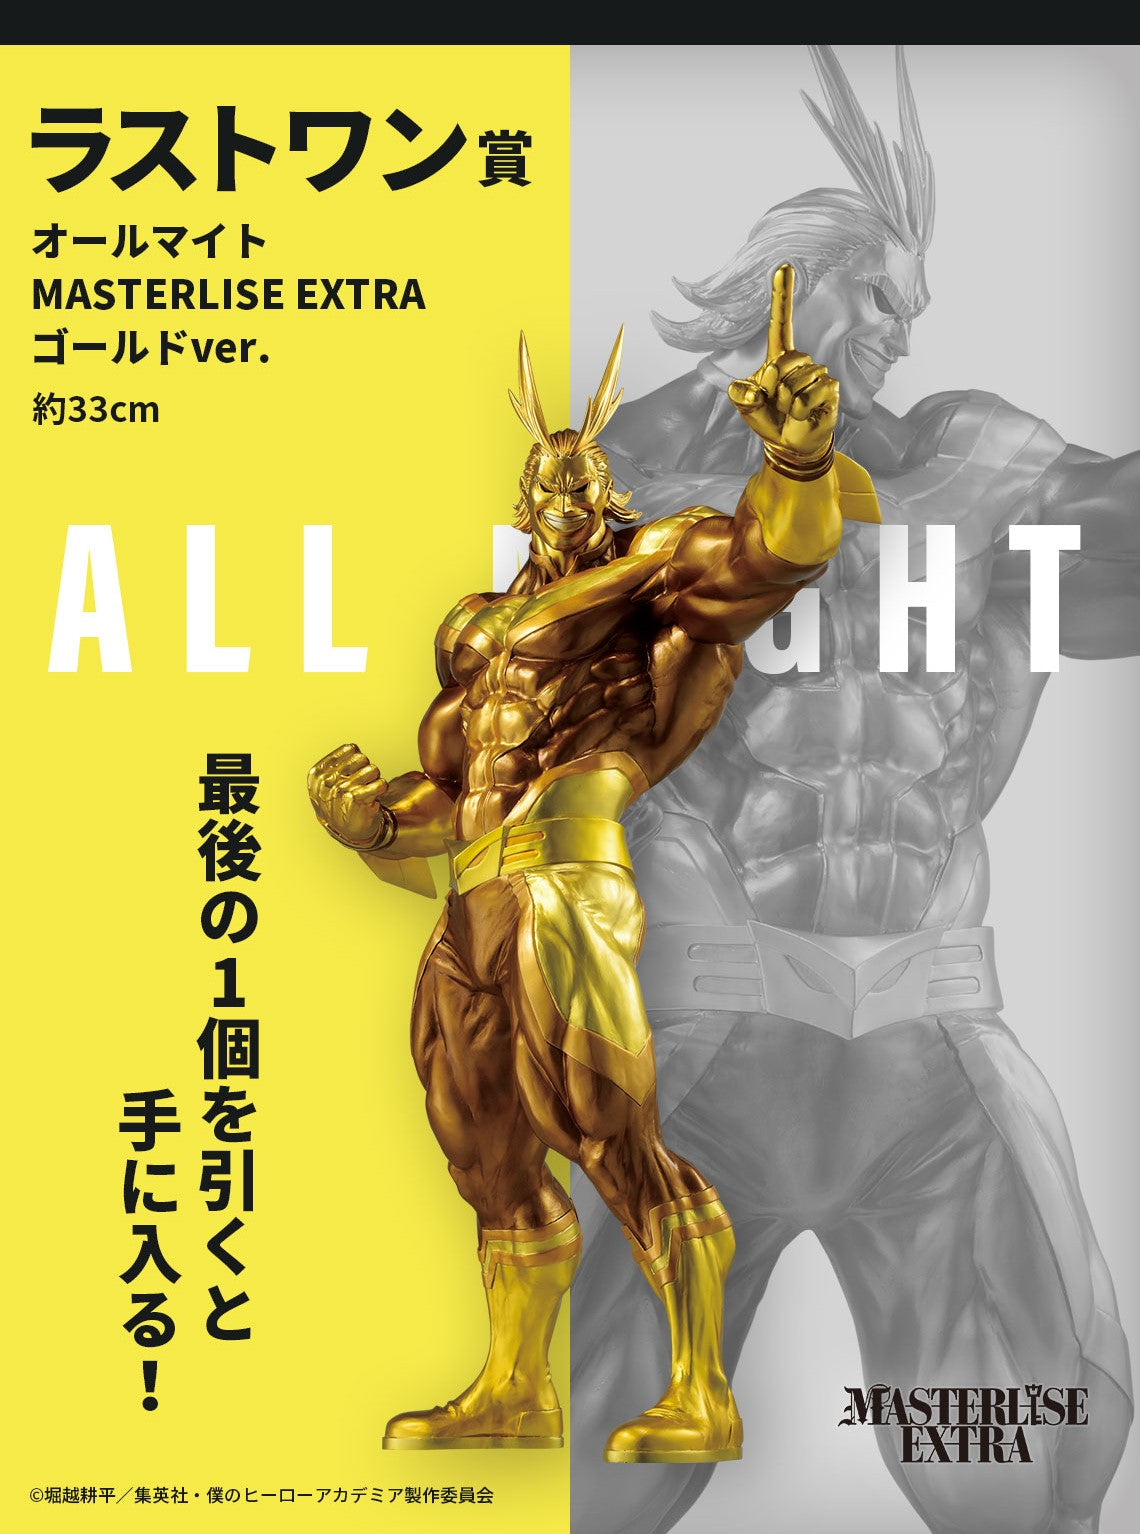 MY HERO ACADEMIA FIGURE - ICHIBAN KUJI - VS - PRIZE LAST ONE - ALL MIGHT - MASTERLISE EXTRA Gold ver.